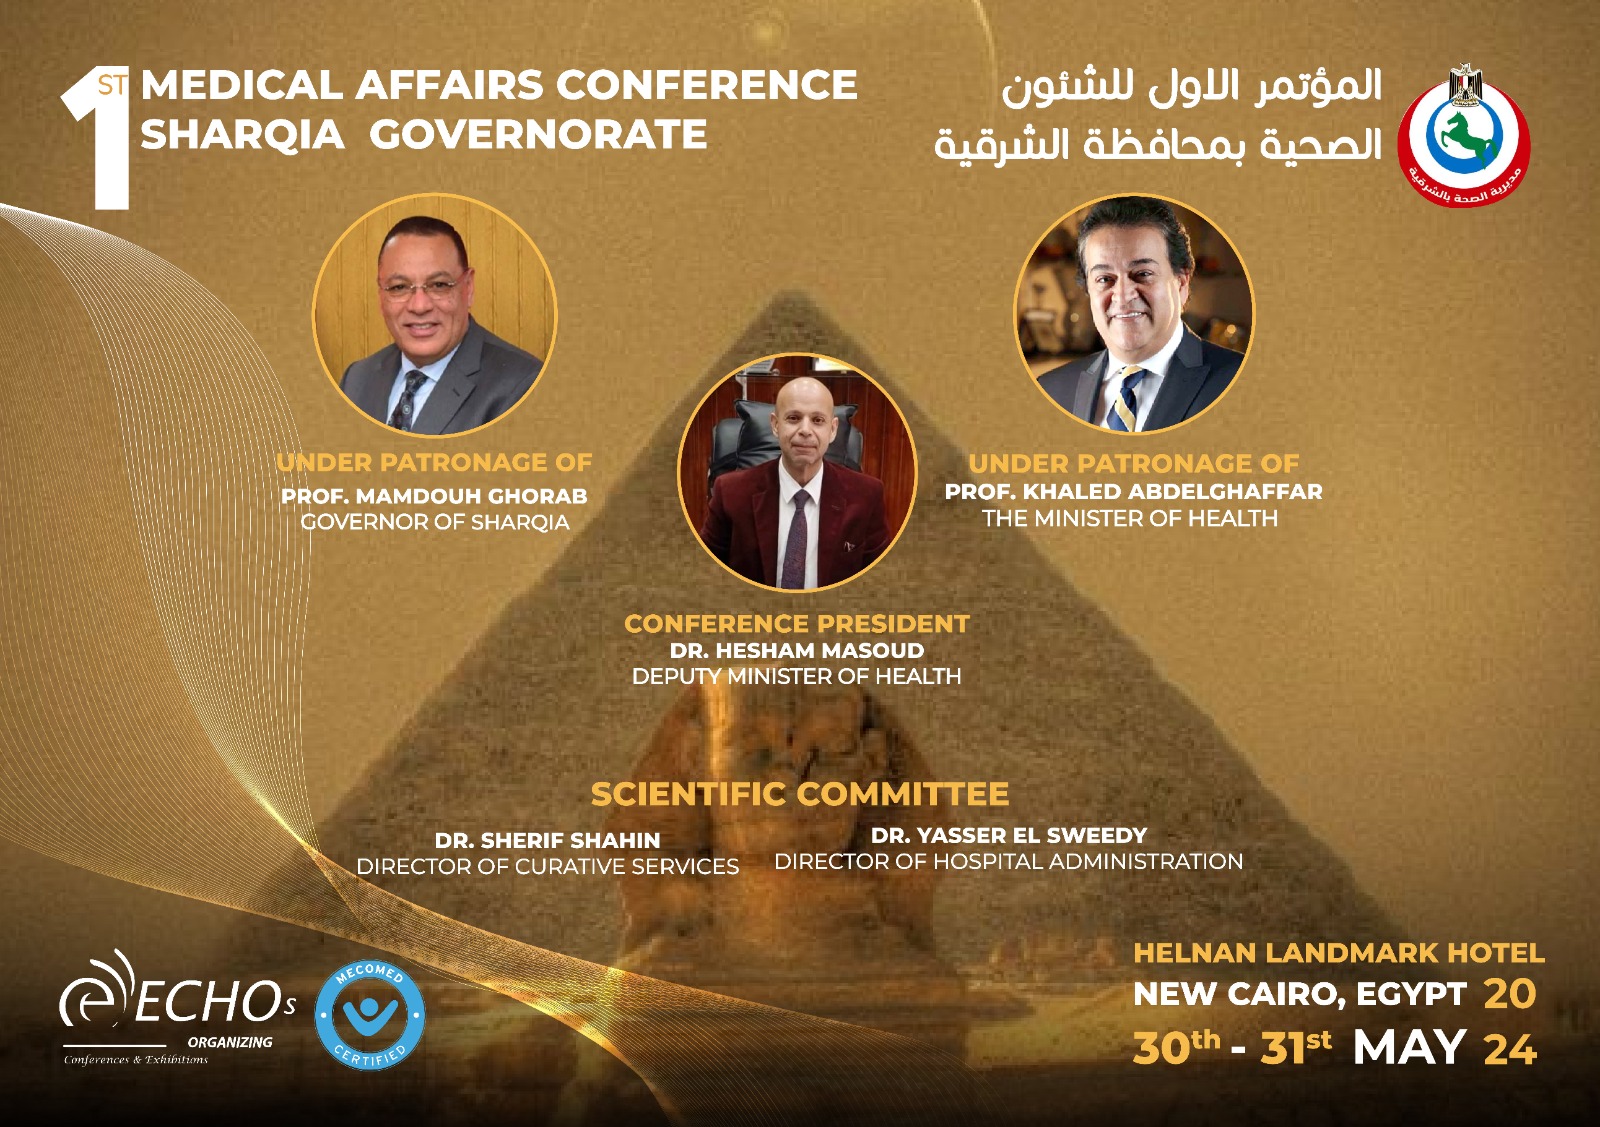 1st MEDICAL AFFAIRS CONFERENCE SHARQIA GOVERNORATE